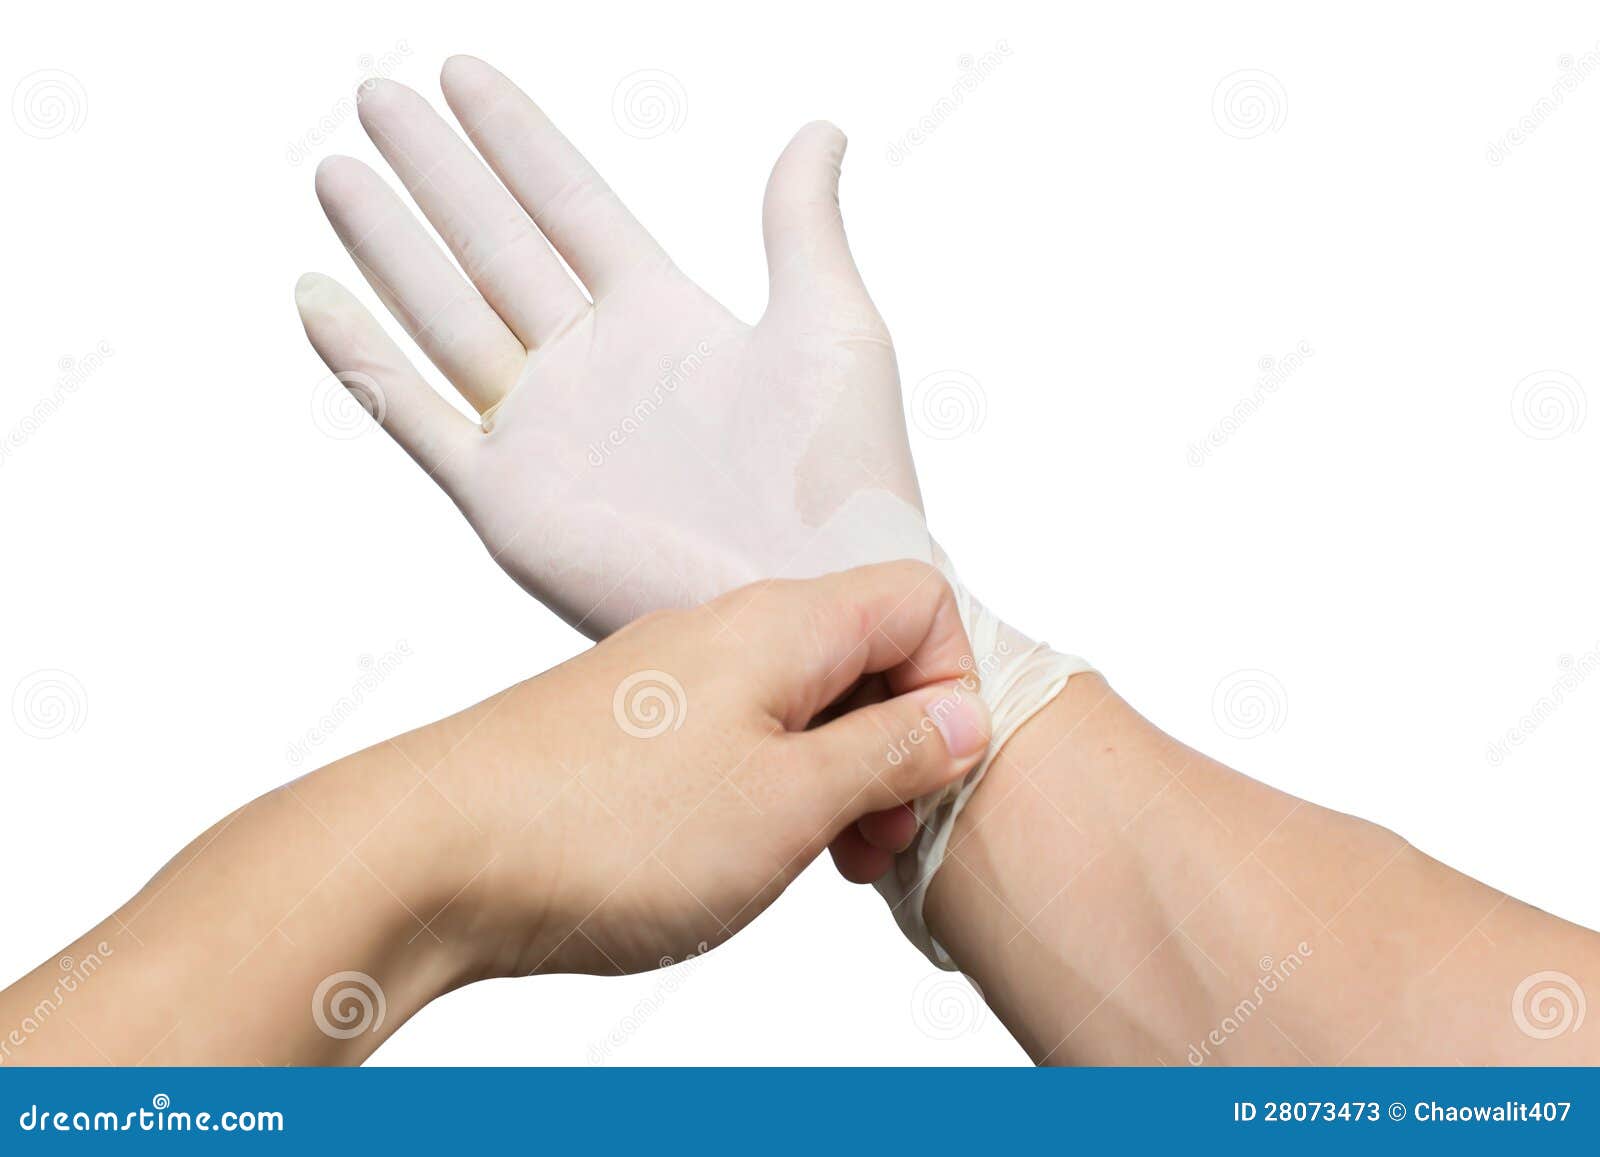 hands with latex gloves